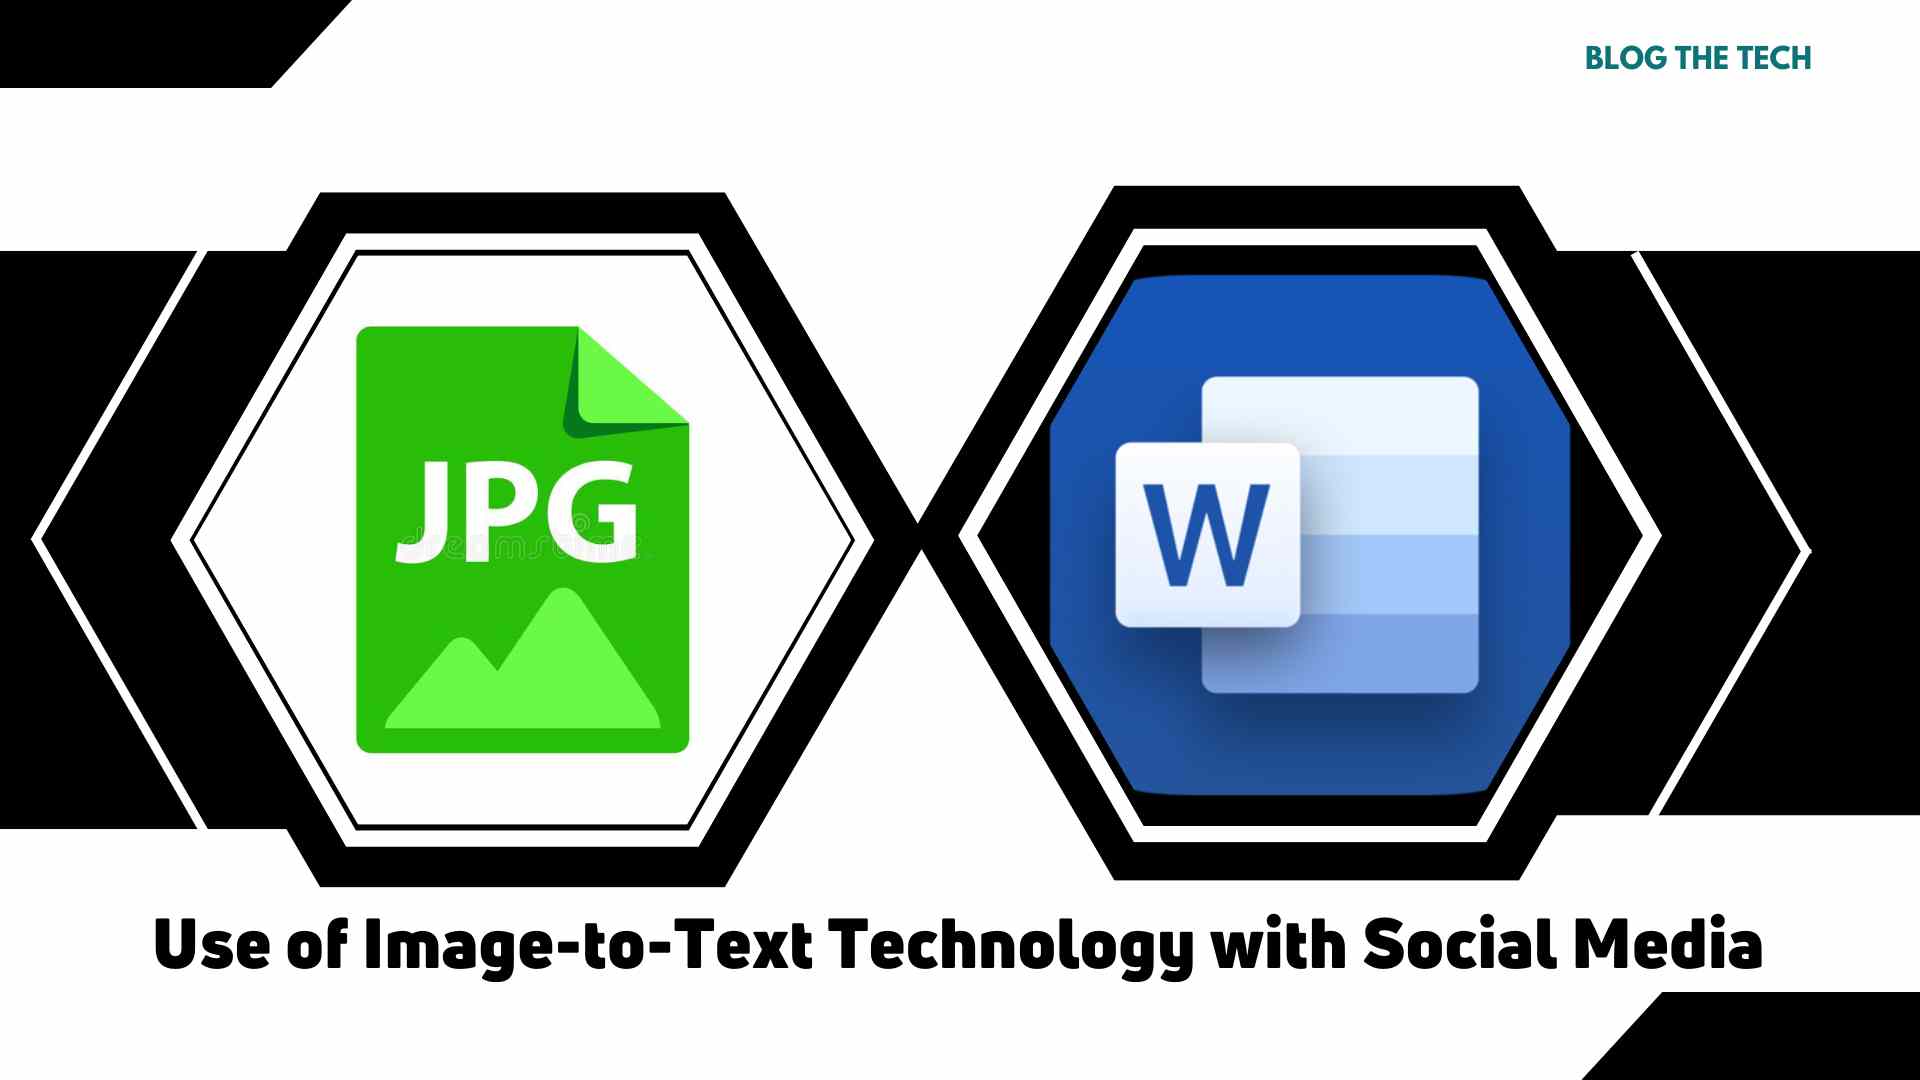 Use of Image-to-Text Technology with Social Media